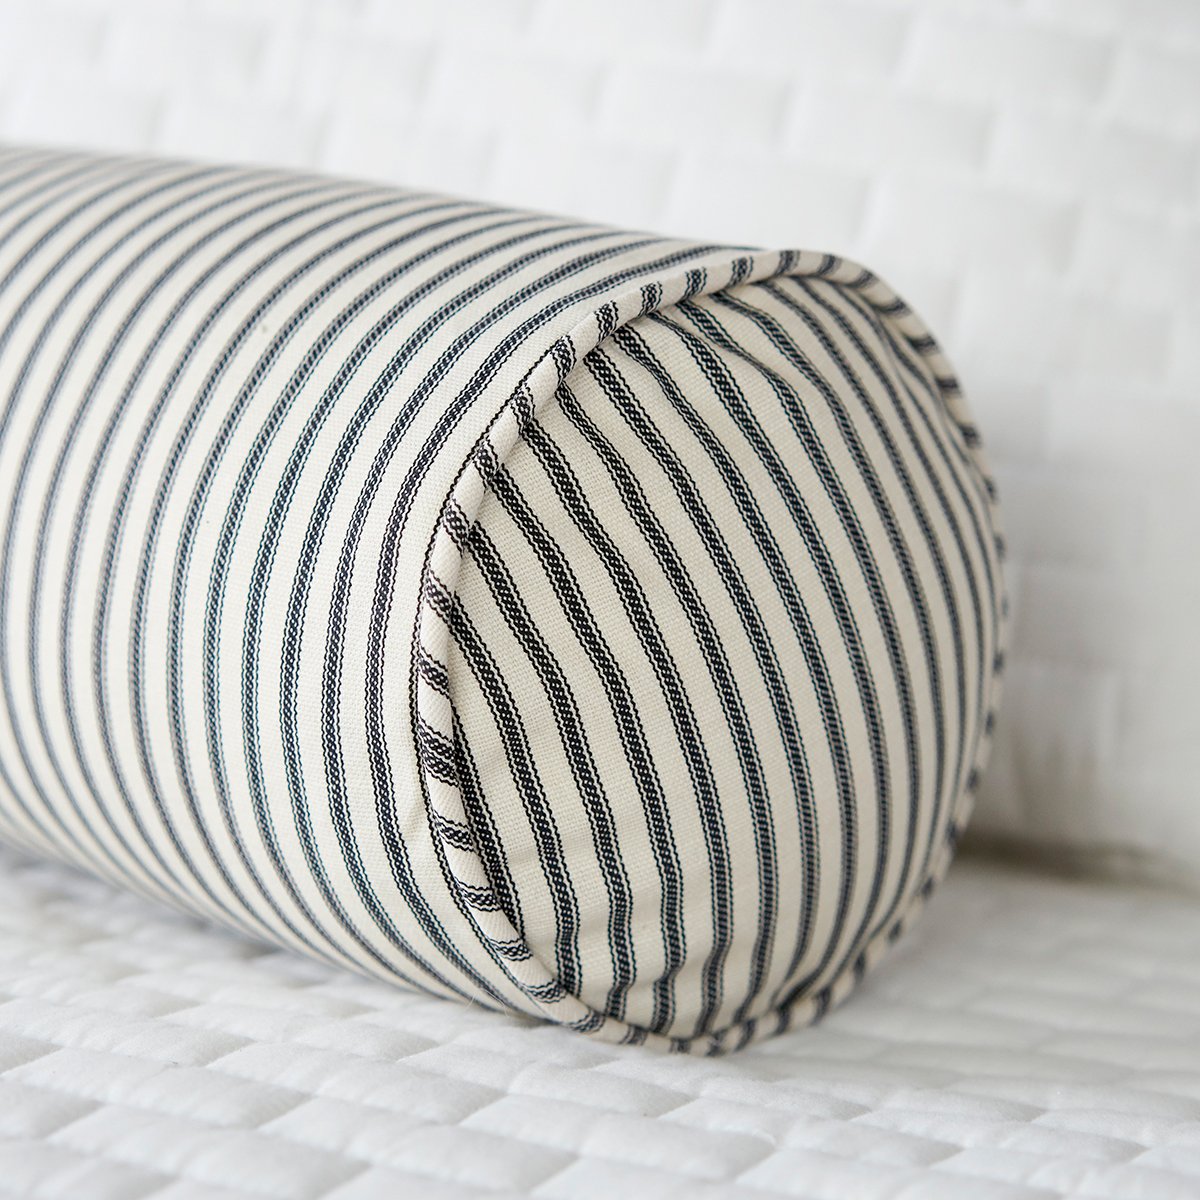 Ticking Stripe Bolster Pillow with Insert 6"x12" - Black, Navy, Red, Grey, Brown